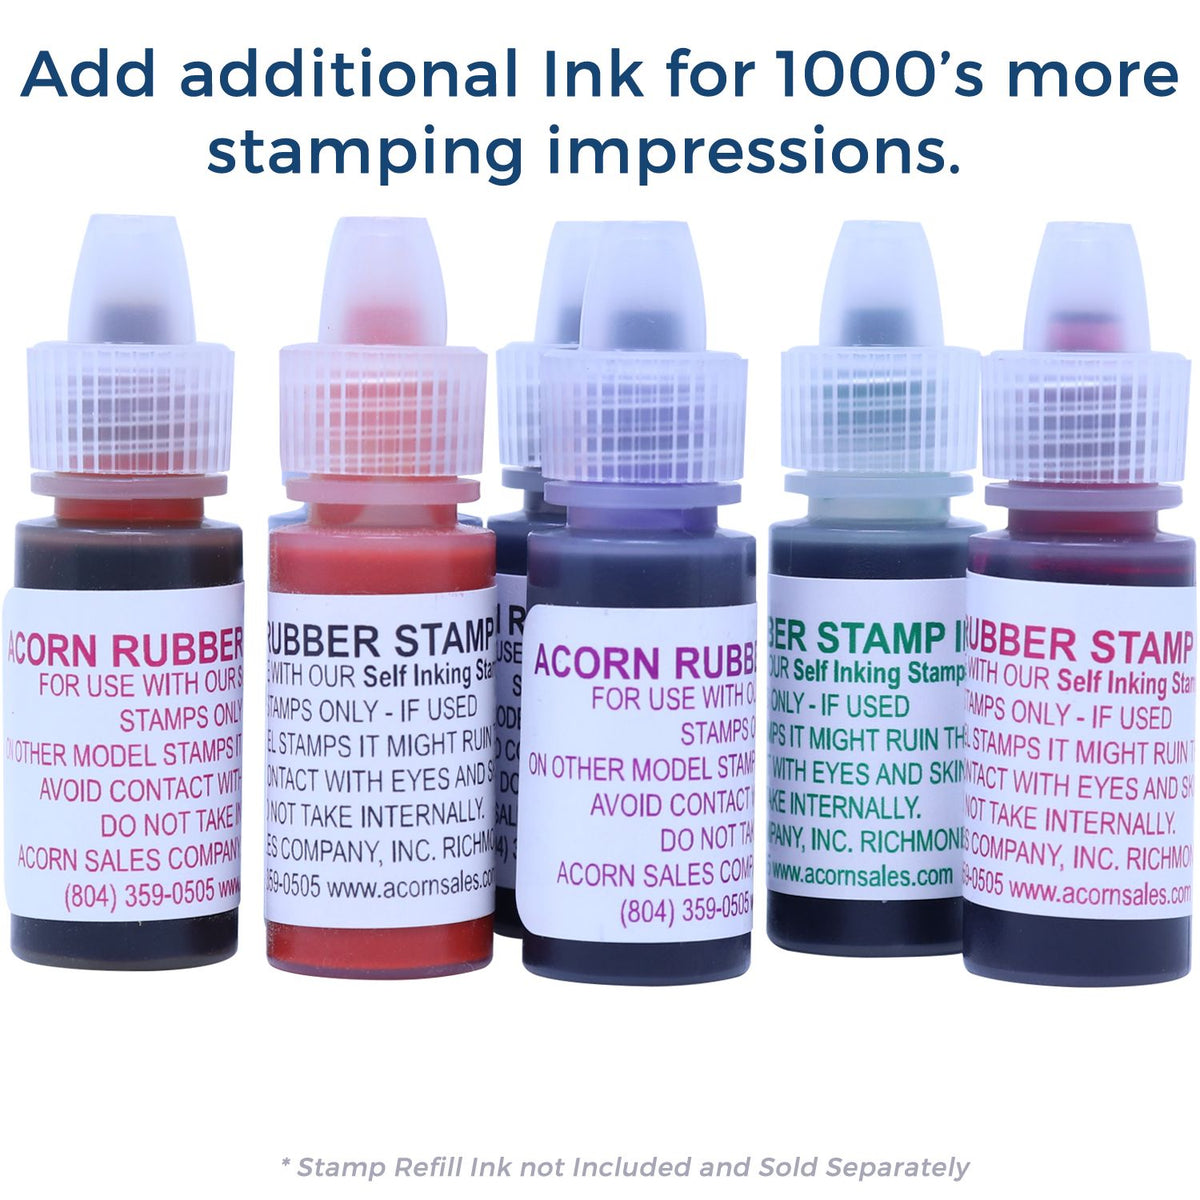 Refill Ink for Self-Inking Round Winking Smiley Stamp Available